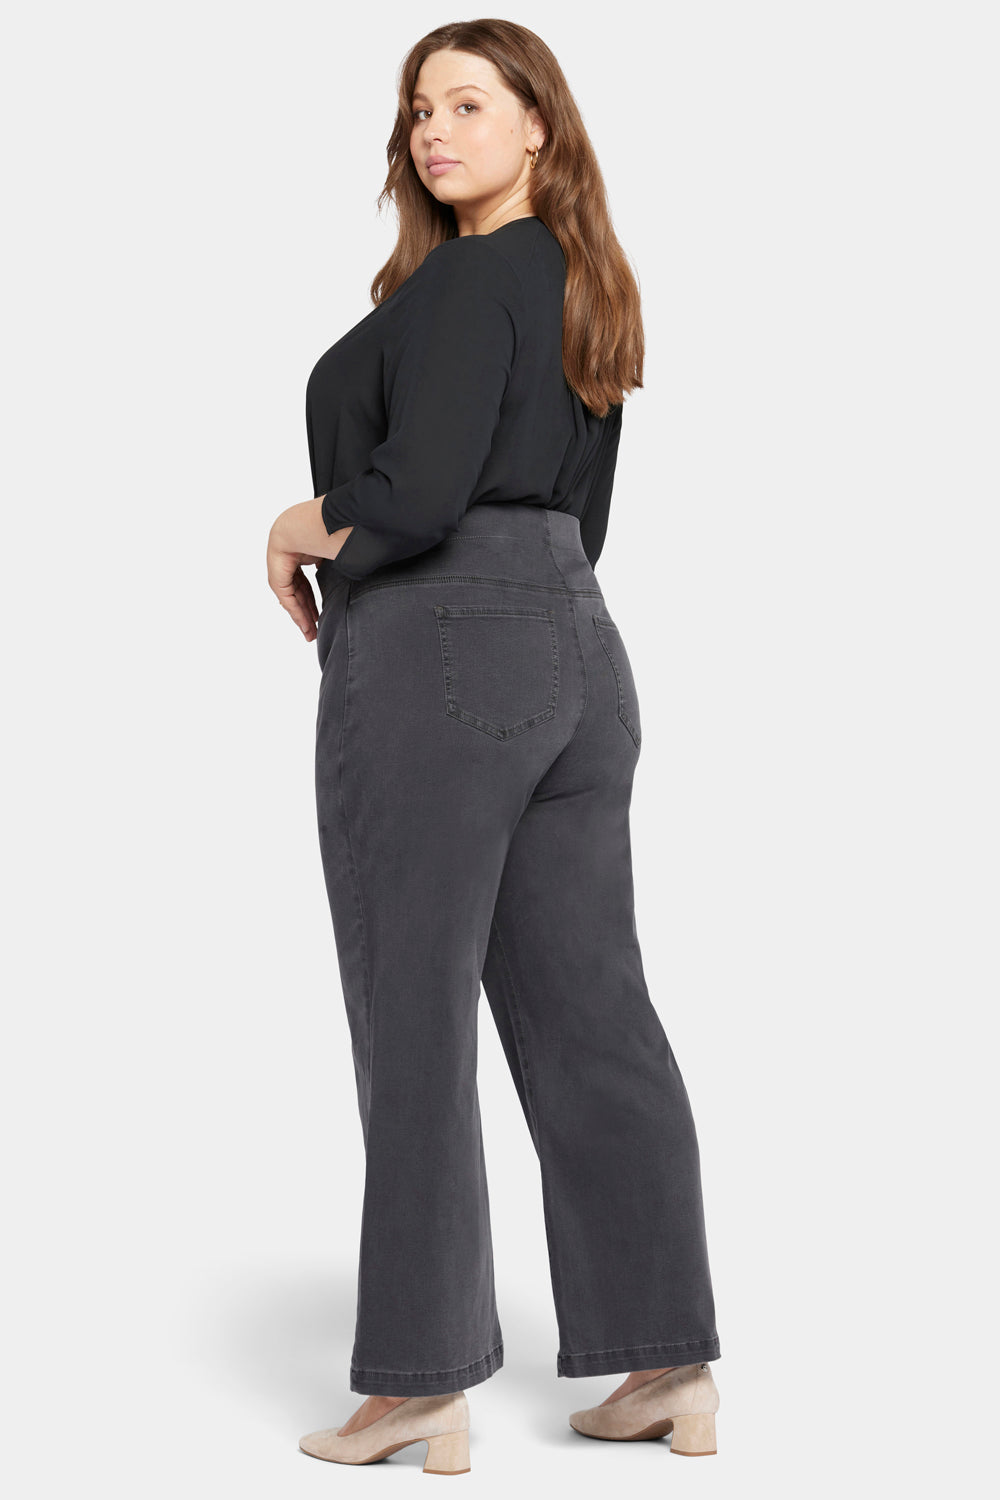 The NYDJ Sculpt Her Denim Pull-On Straight Jeans Are on Sale at QVC